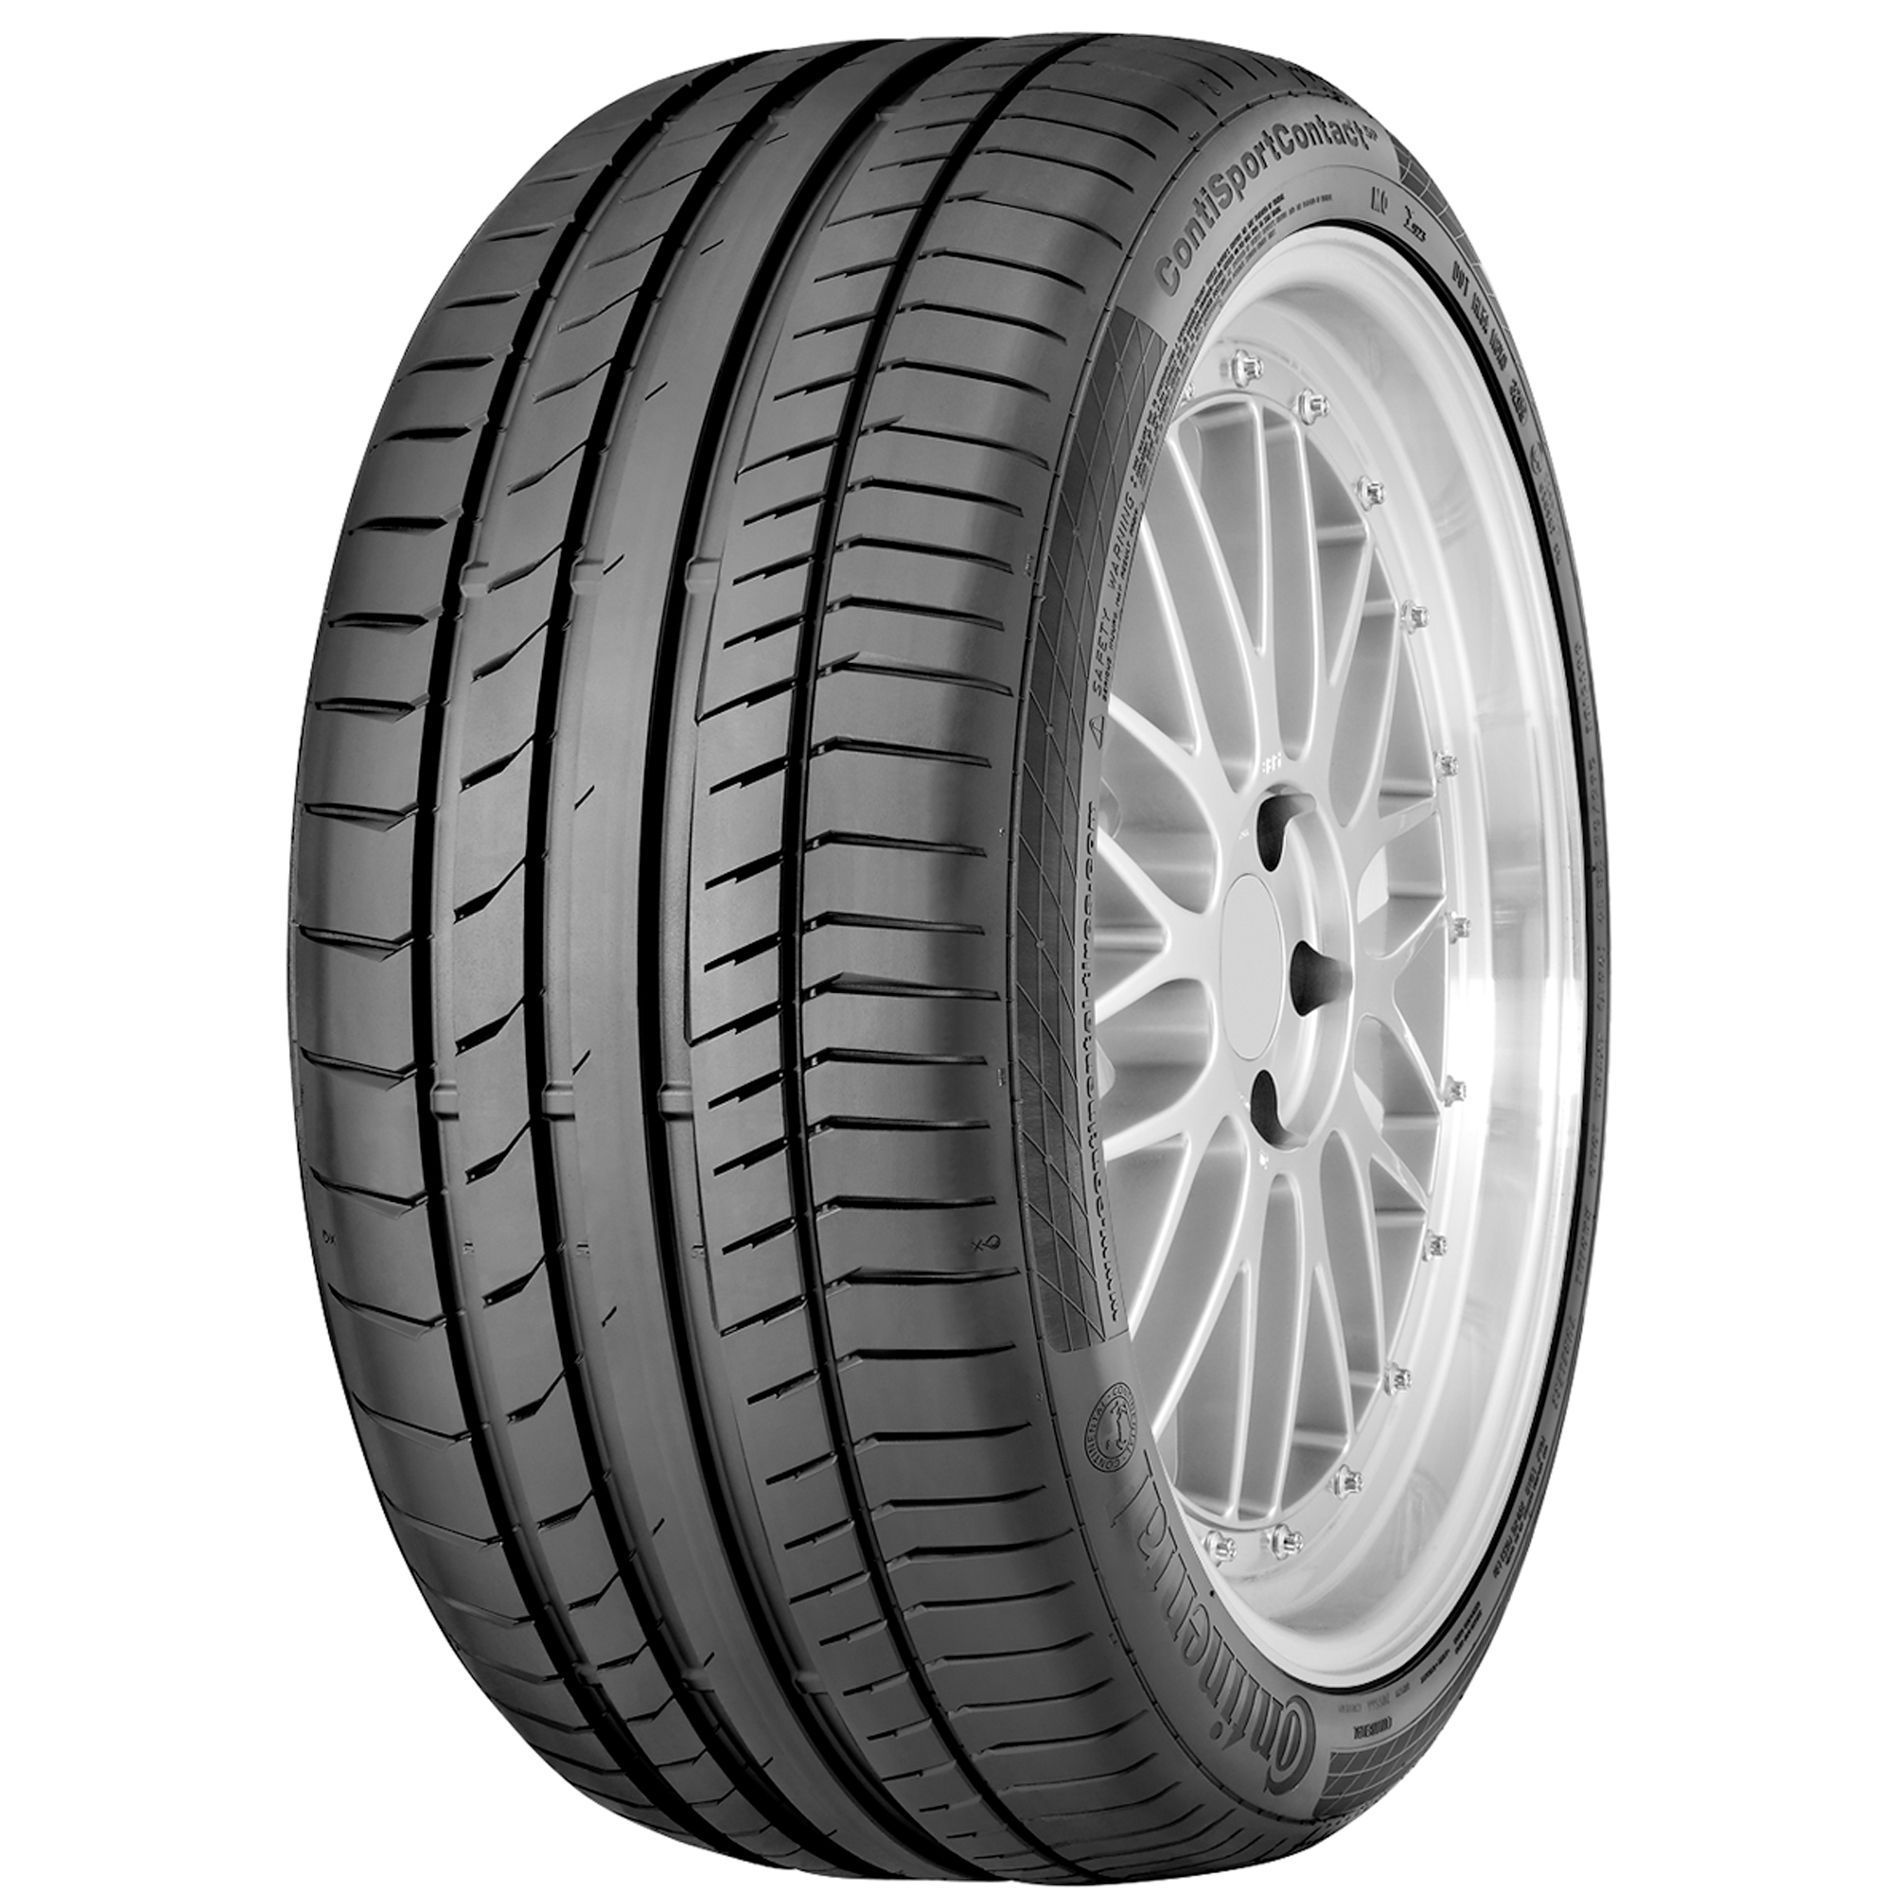 Континенталь 5 лето. Continental CONTIECOCONTACT 5 215/65 r16 98h. Continental CONTIPREMIUMCONTACT 5. Continental CONTIPREMIUMCONTACT 6 215/55 r17 94v. Continental CONTIECOCONTACT 6 225/55 r17 101y XL.